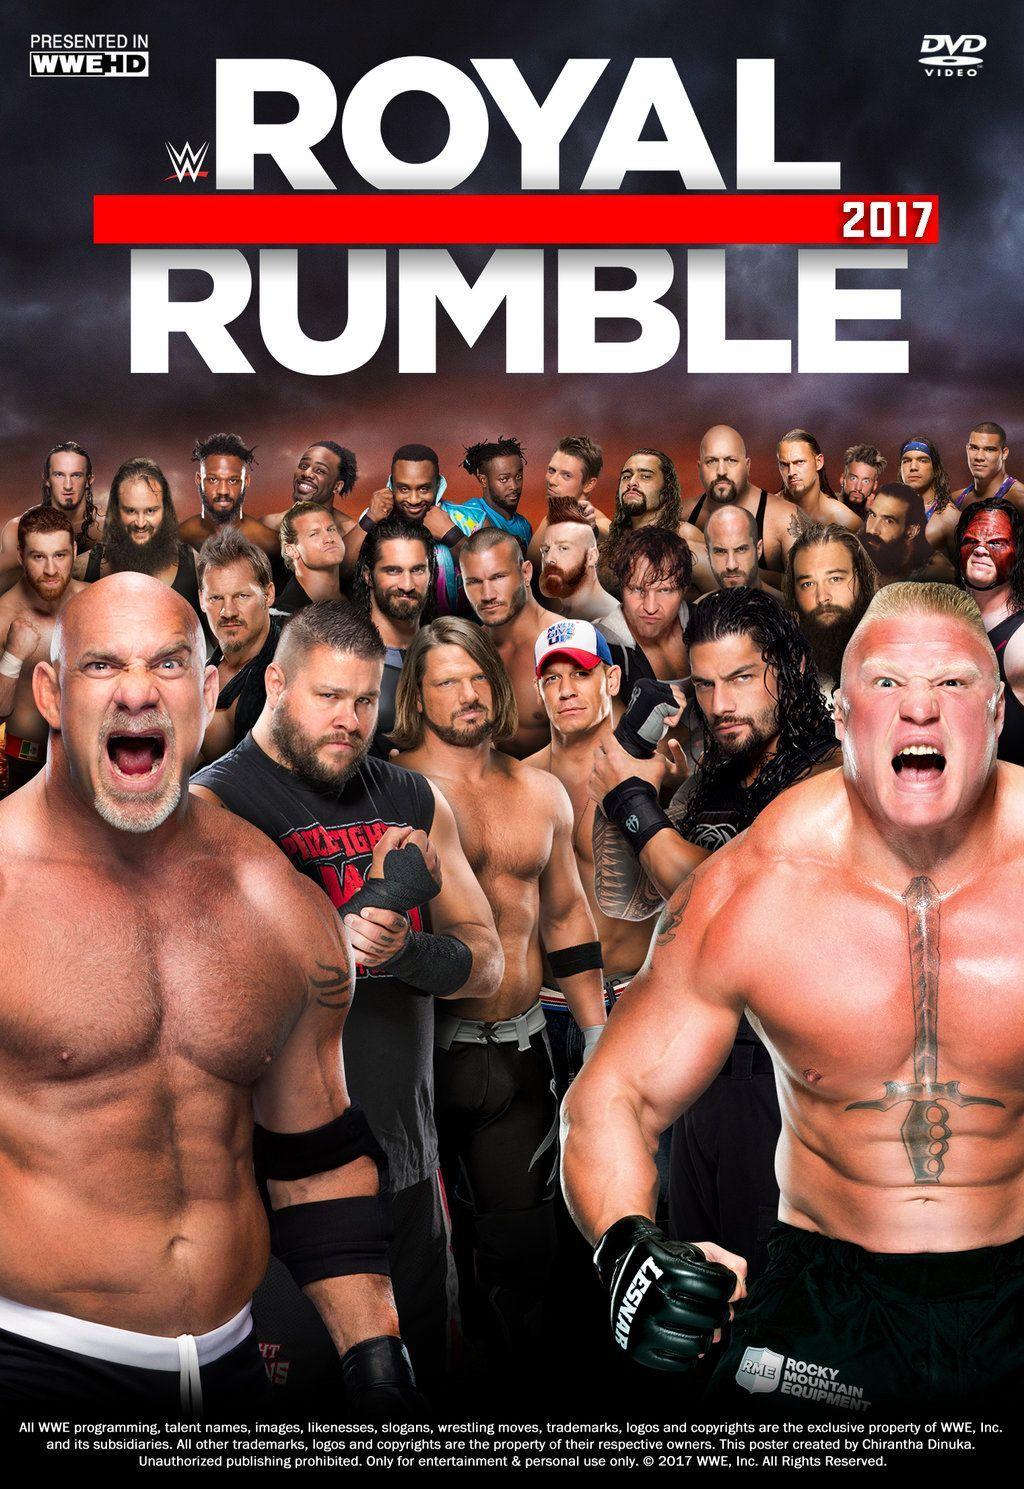 Royal Rumble 2017 Poster by Chirantha. Professional Wrestling World